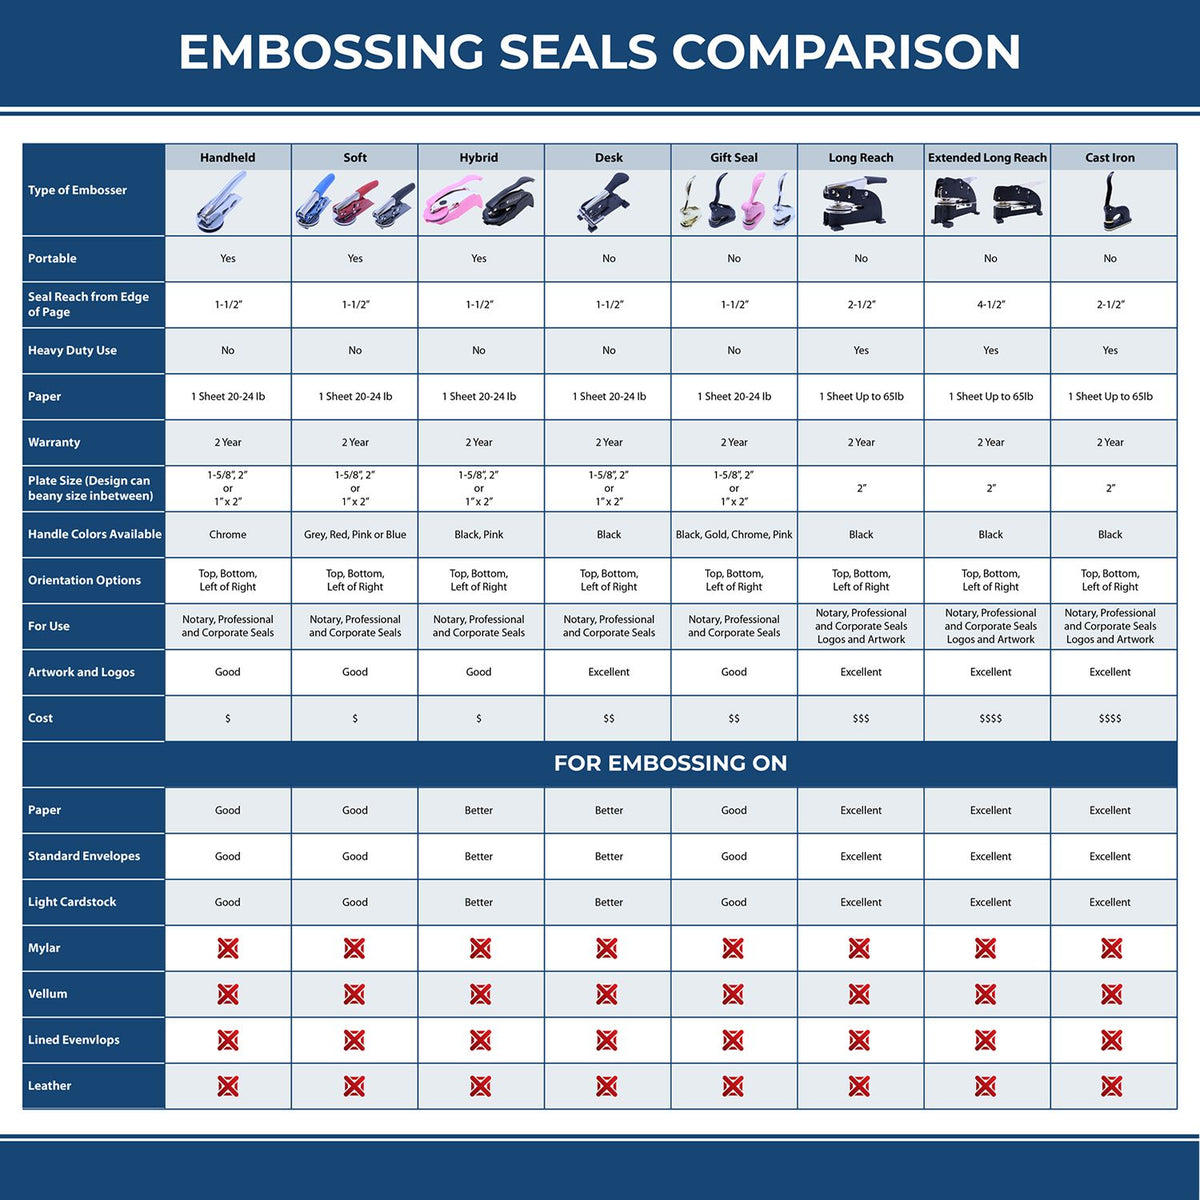 A comparison chart for the different types of mount models available for the State of Minnesota Long Reach Architectural Embossing Seal.